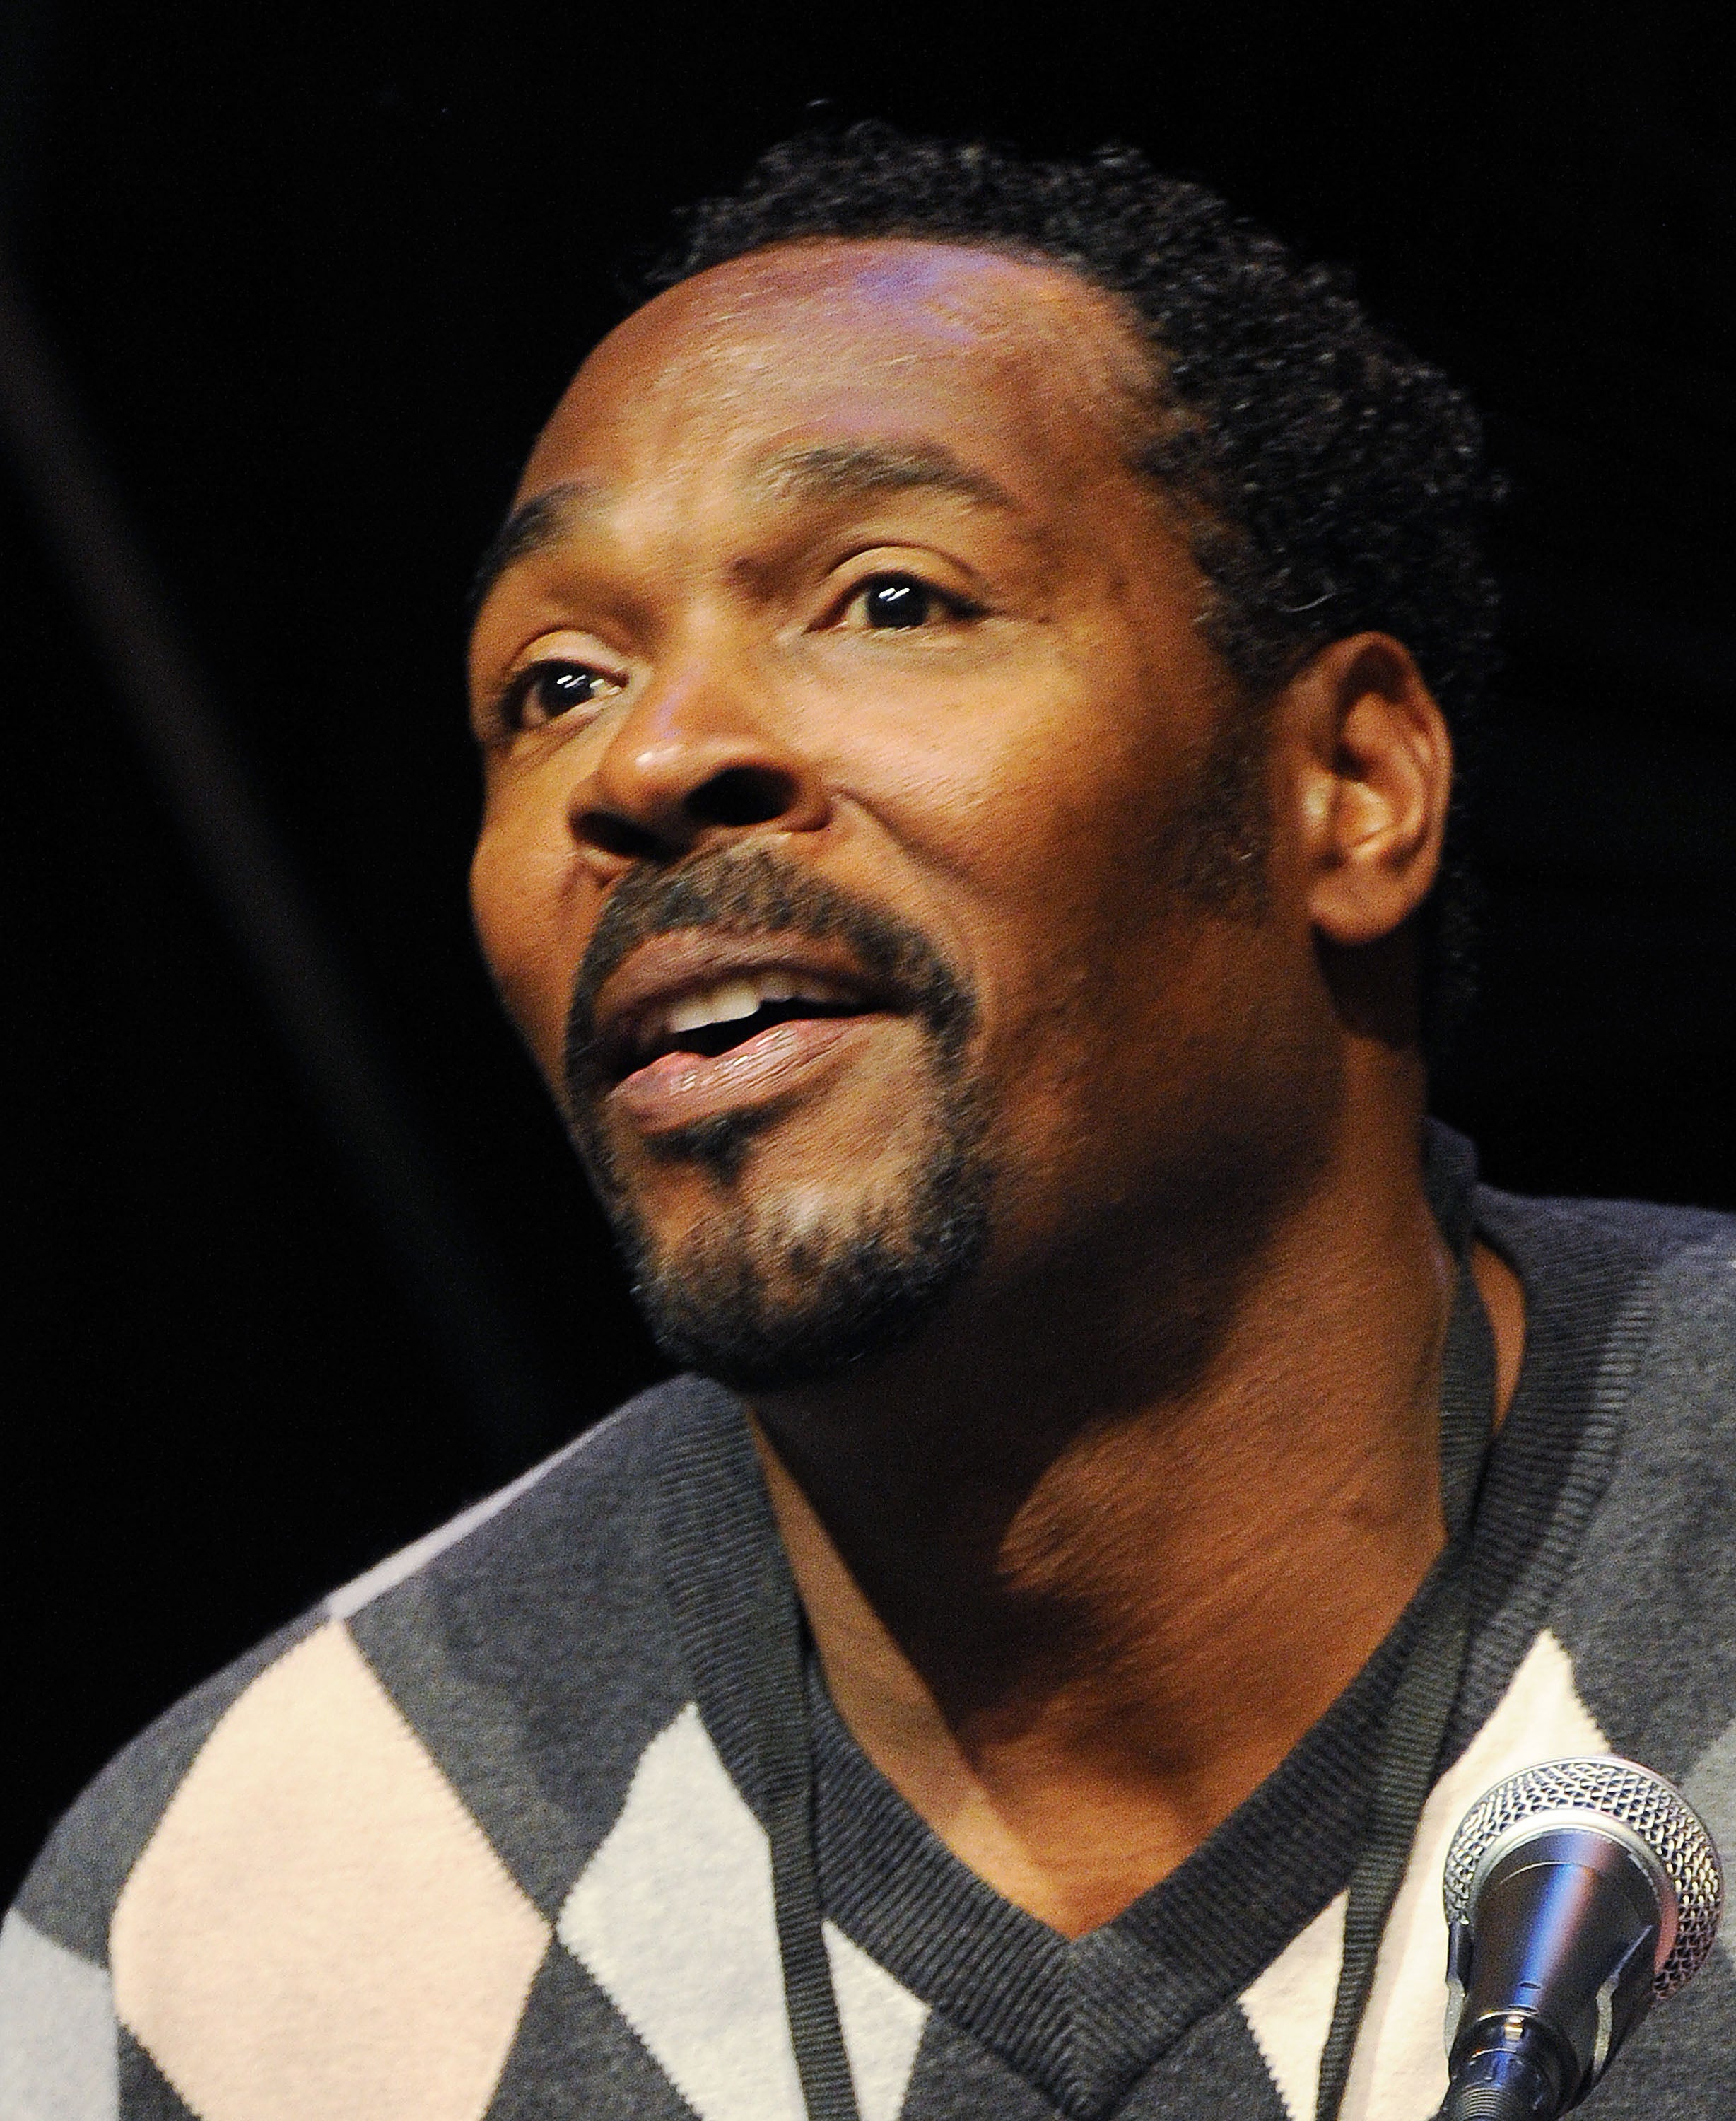 New Details Released on Rodney King's Death